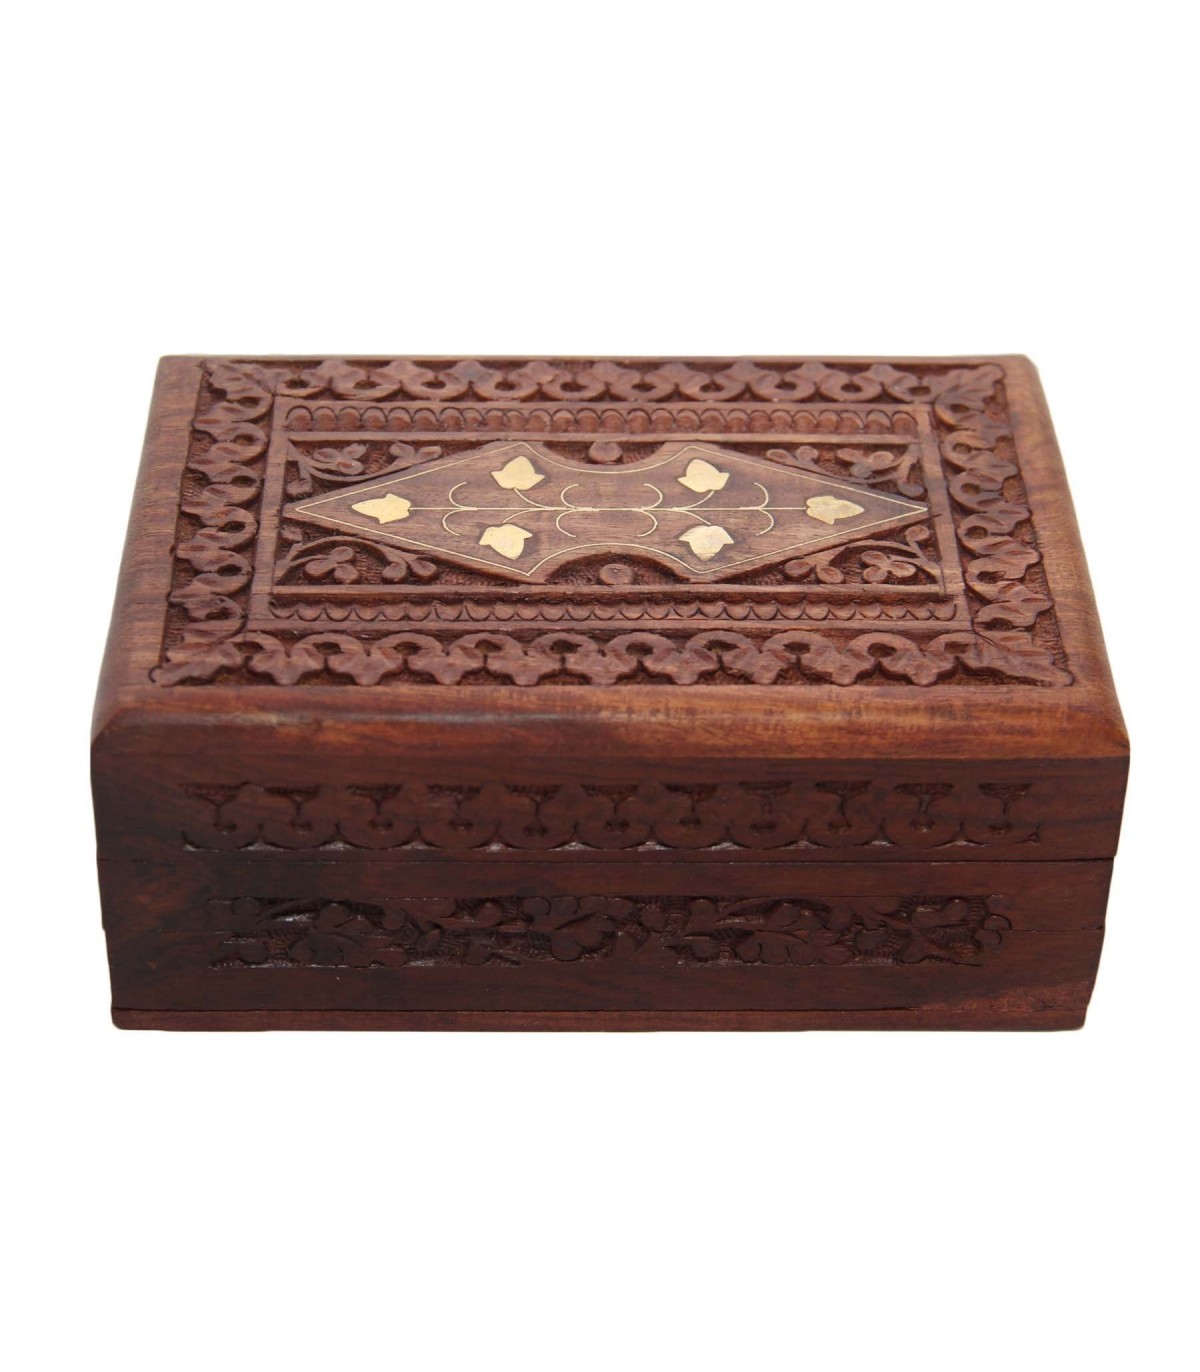 Carved Wooden Box| Handmade Wooden Box From Nepal